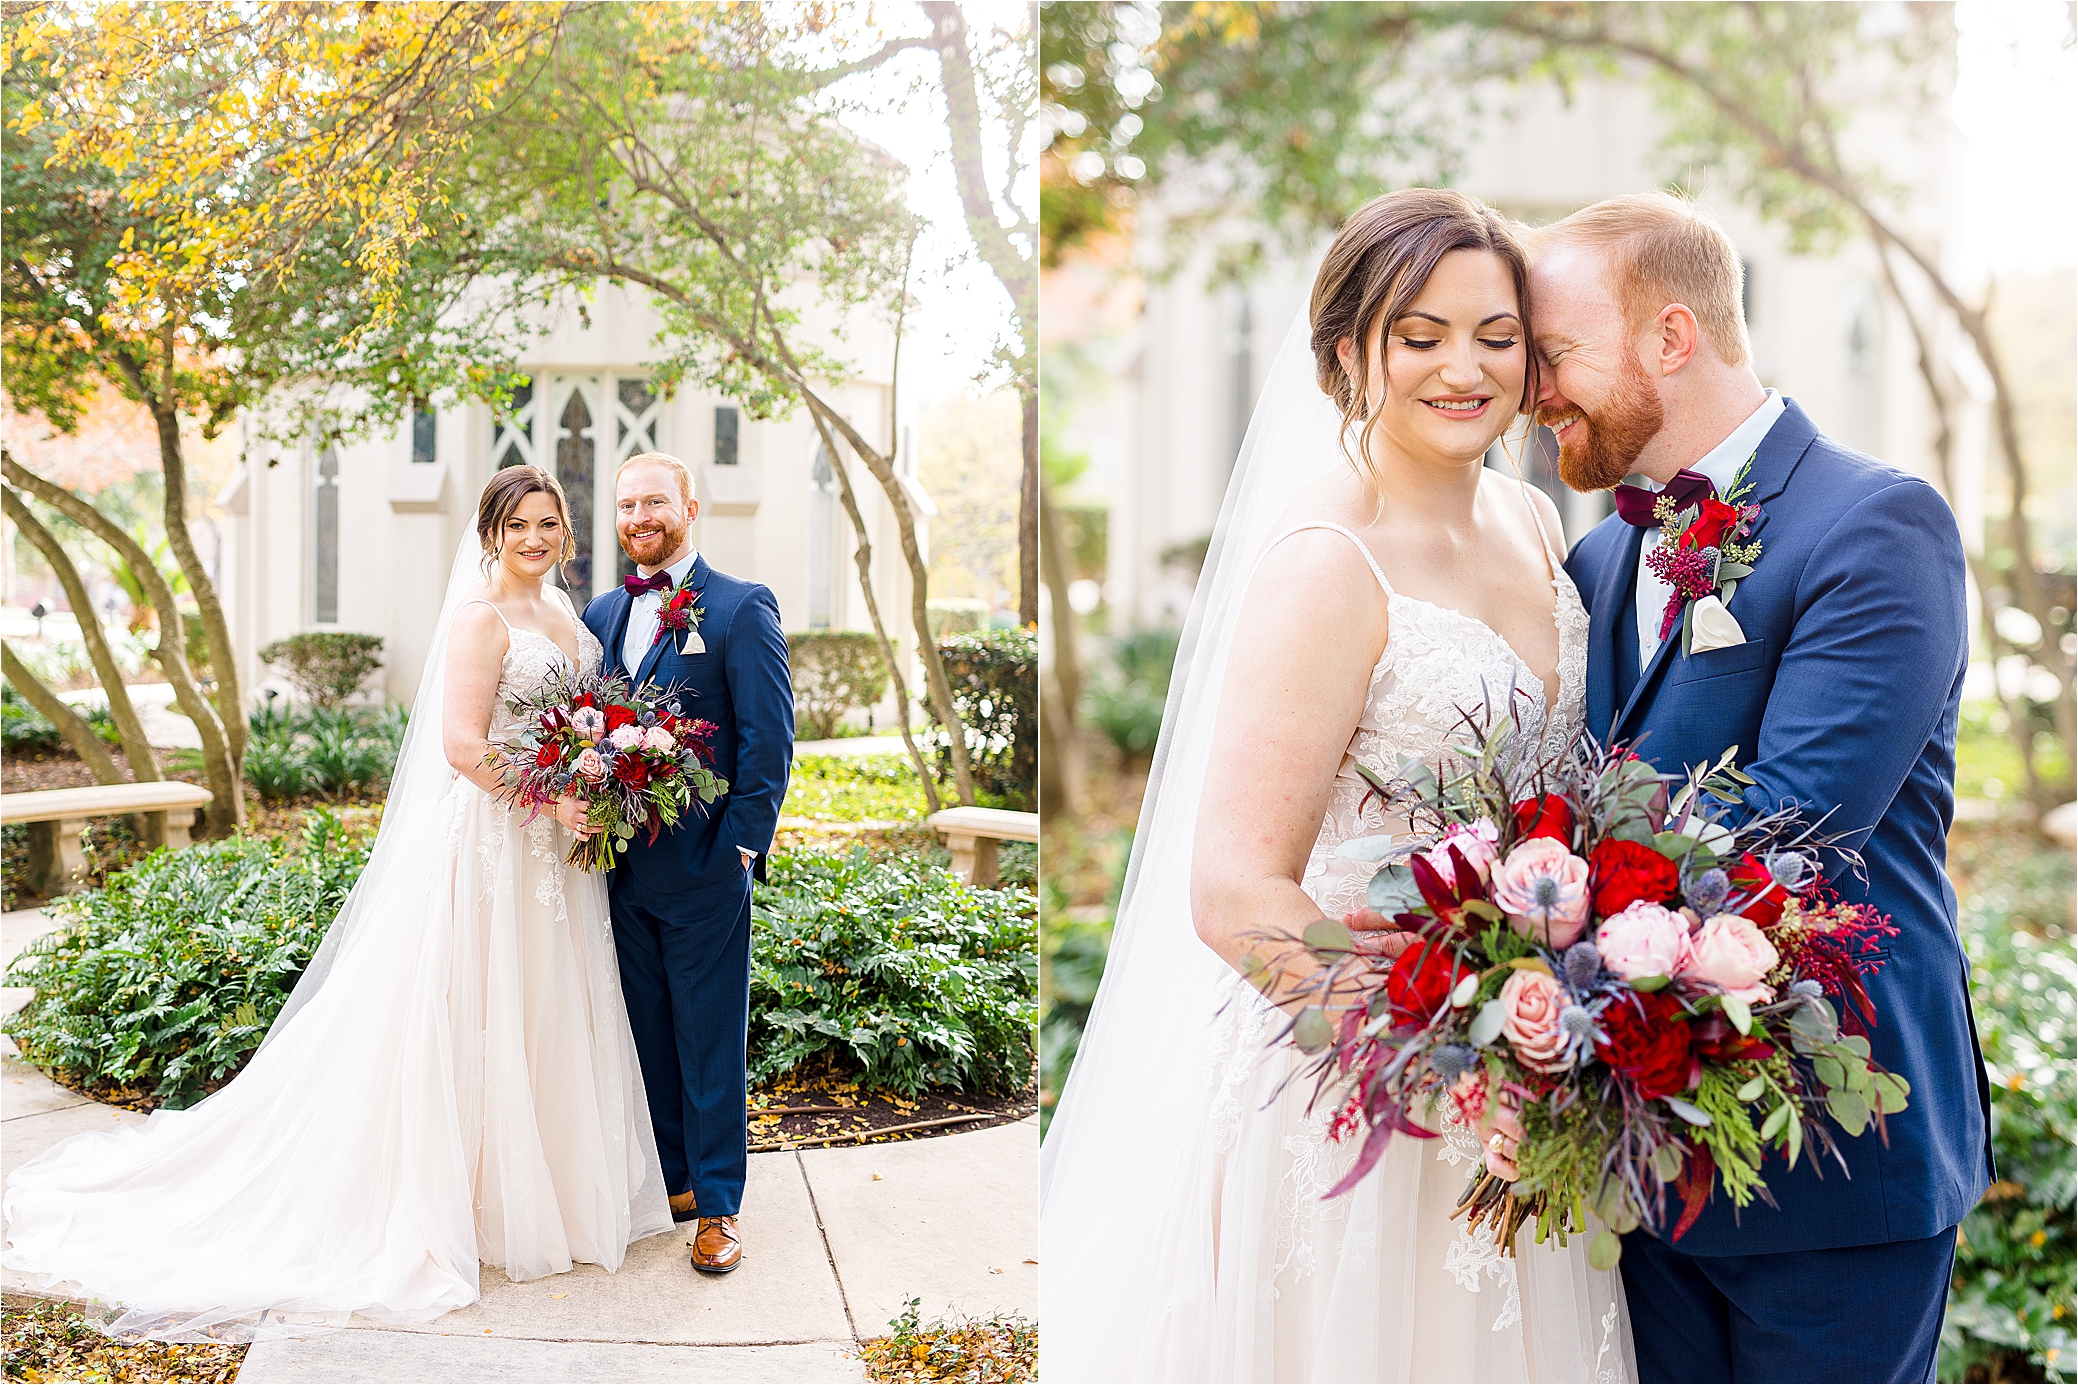 A groom to be nuzzles into his brides cheek as she looks down at her colorful wedding bouquet filled with navy, greenery, pink and red flowers.